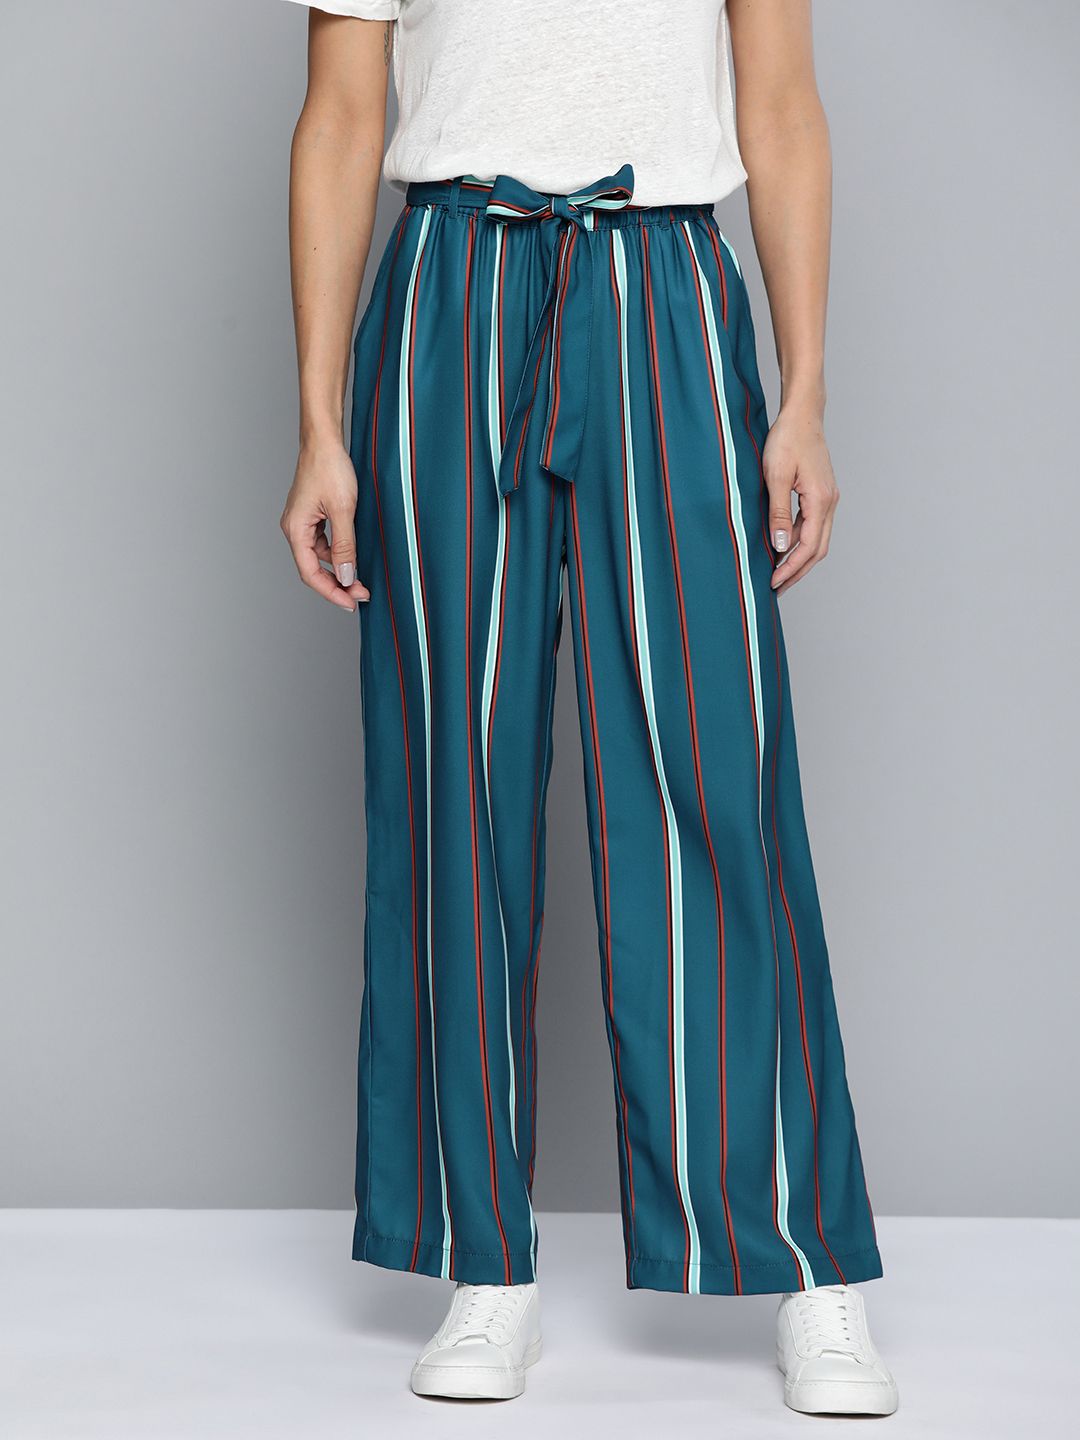 Mast & Harbour Women Teal Blue & White Striped Trousers Price in India